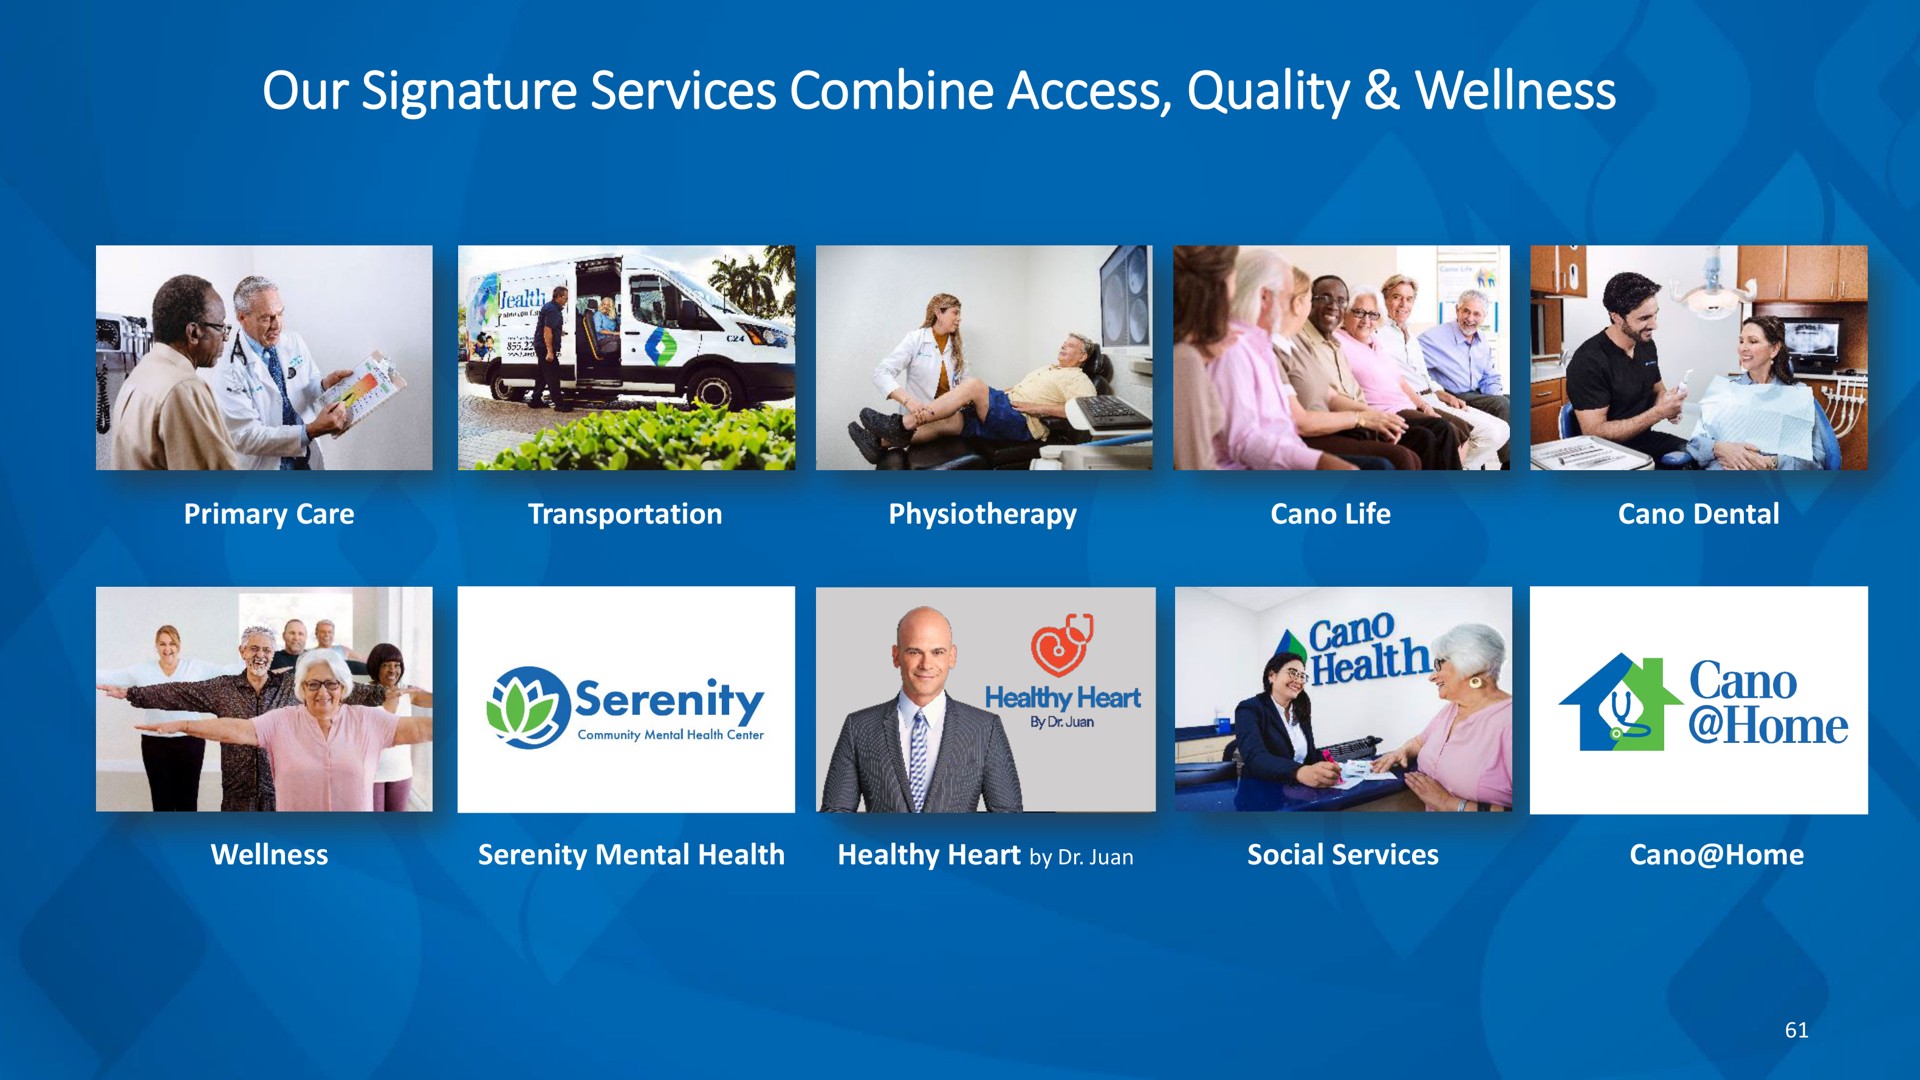 our signature services combine access quality wellness we serenity | Cano Health